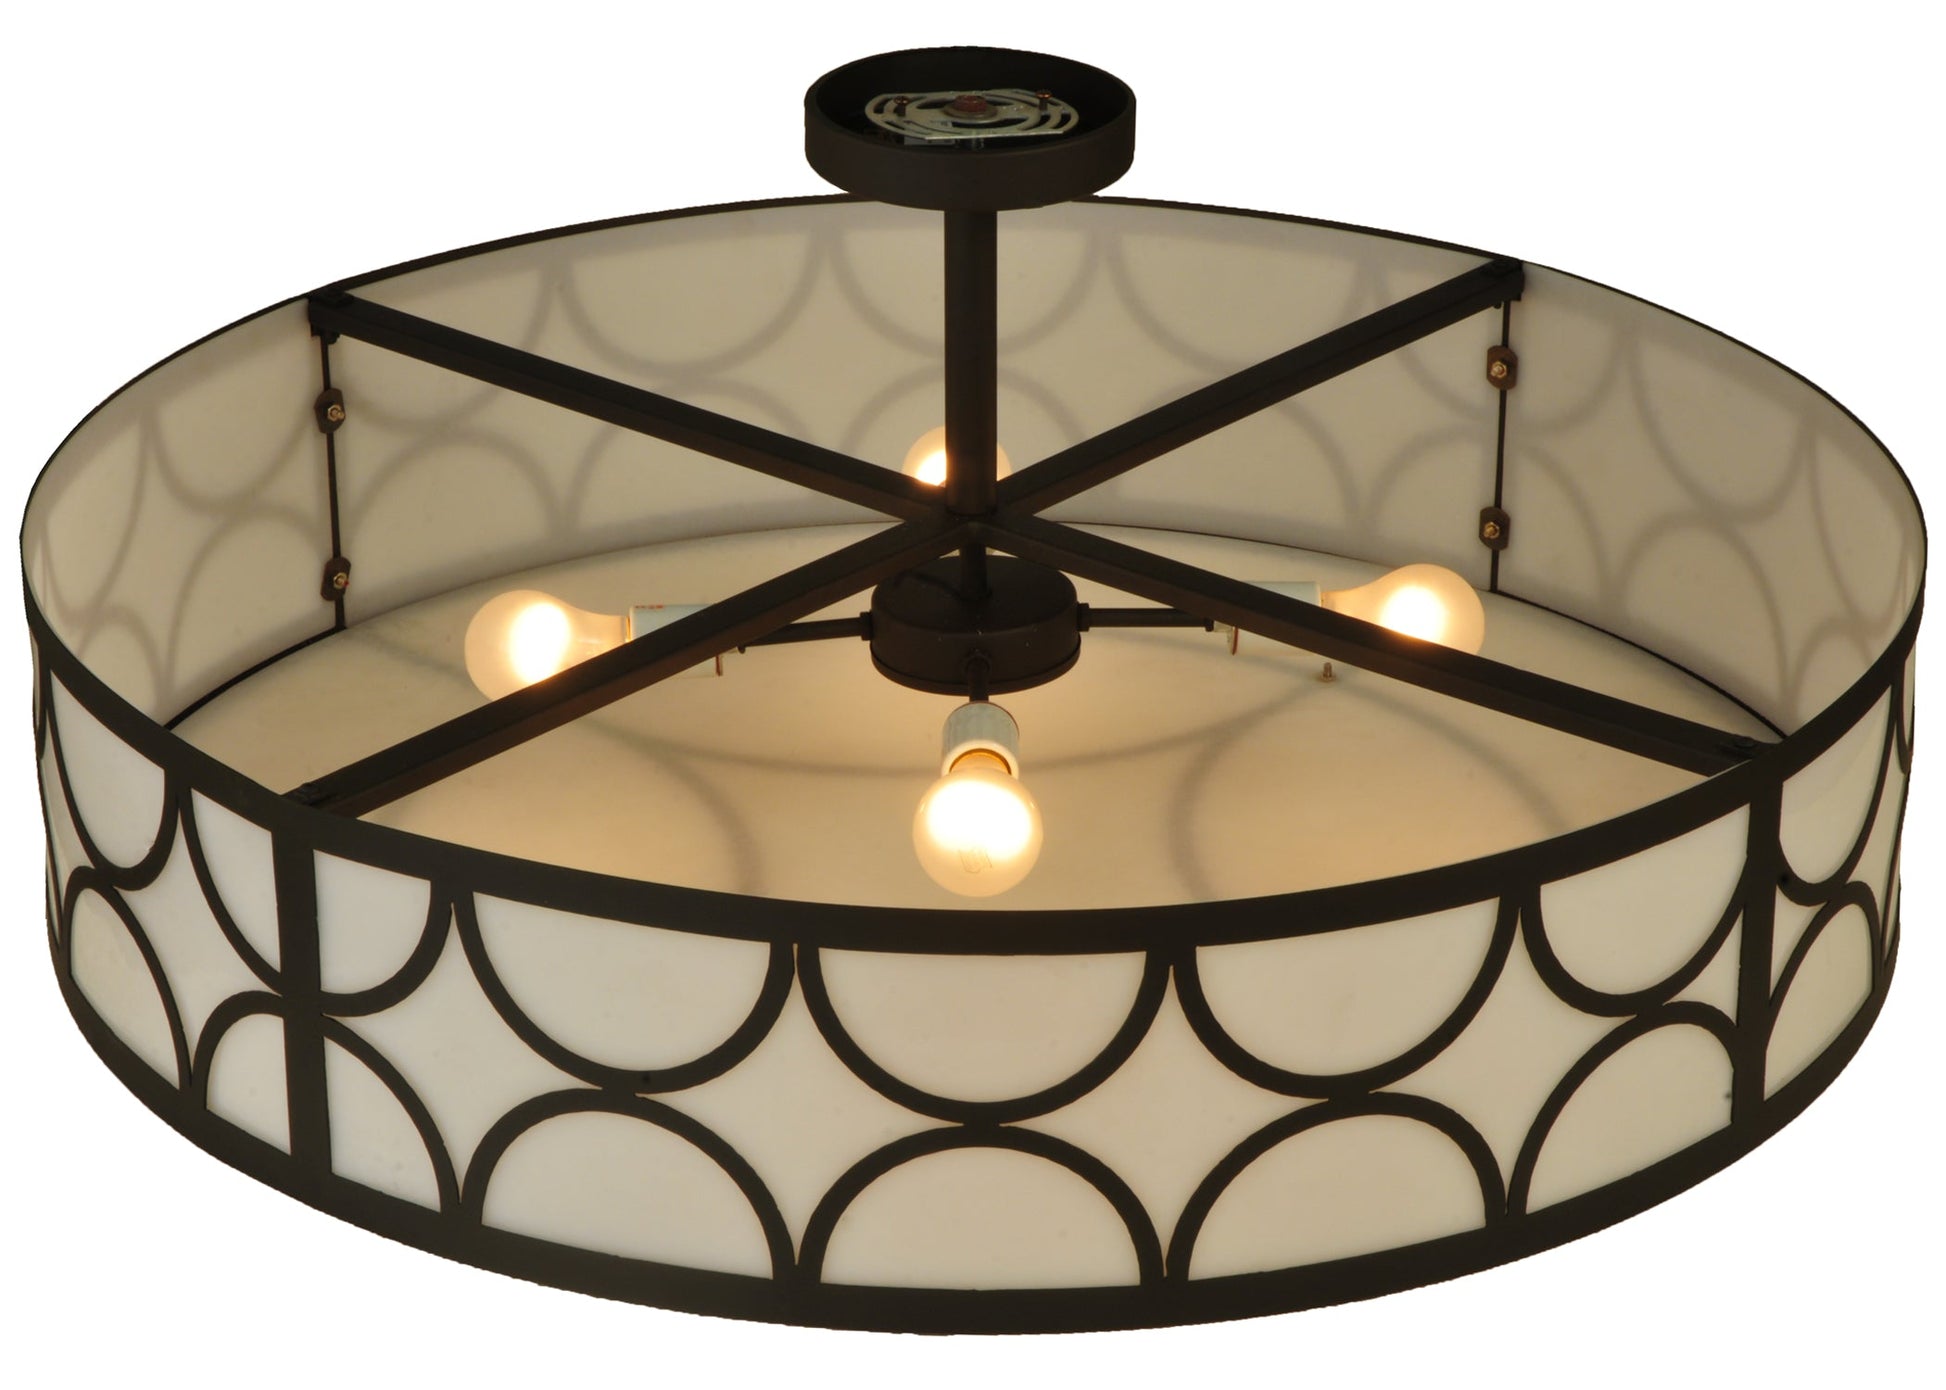 36" Revival Deco Cilindro Semi Flushmount by 2nd Ave Lighting